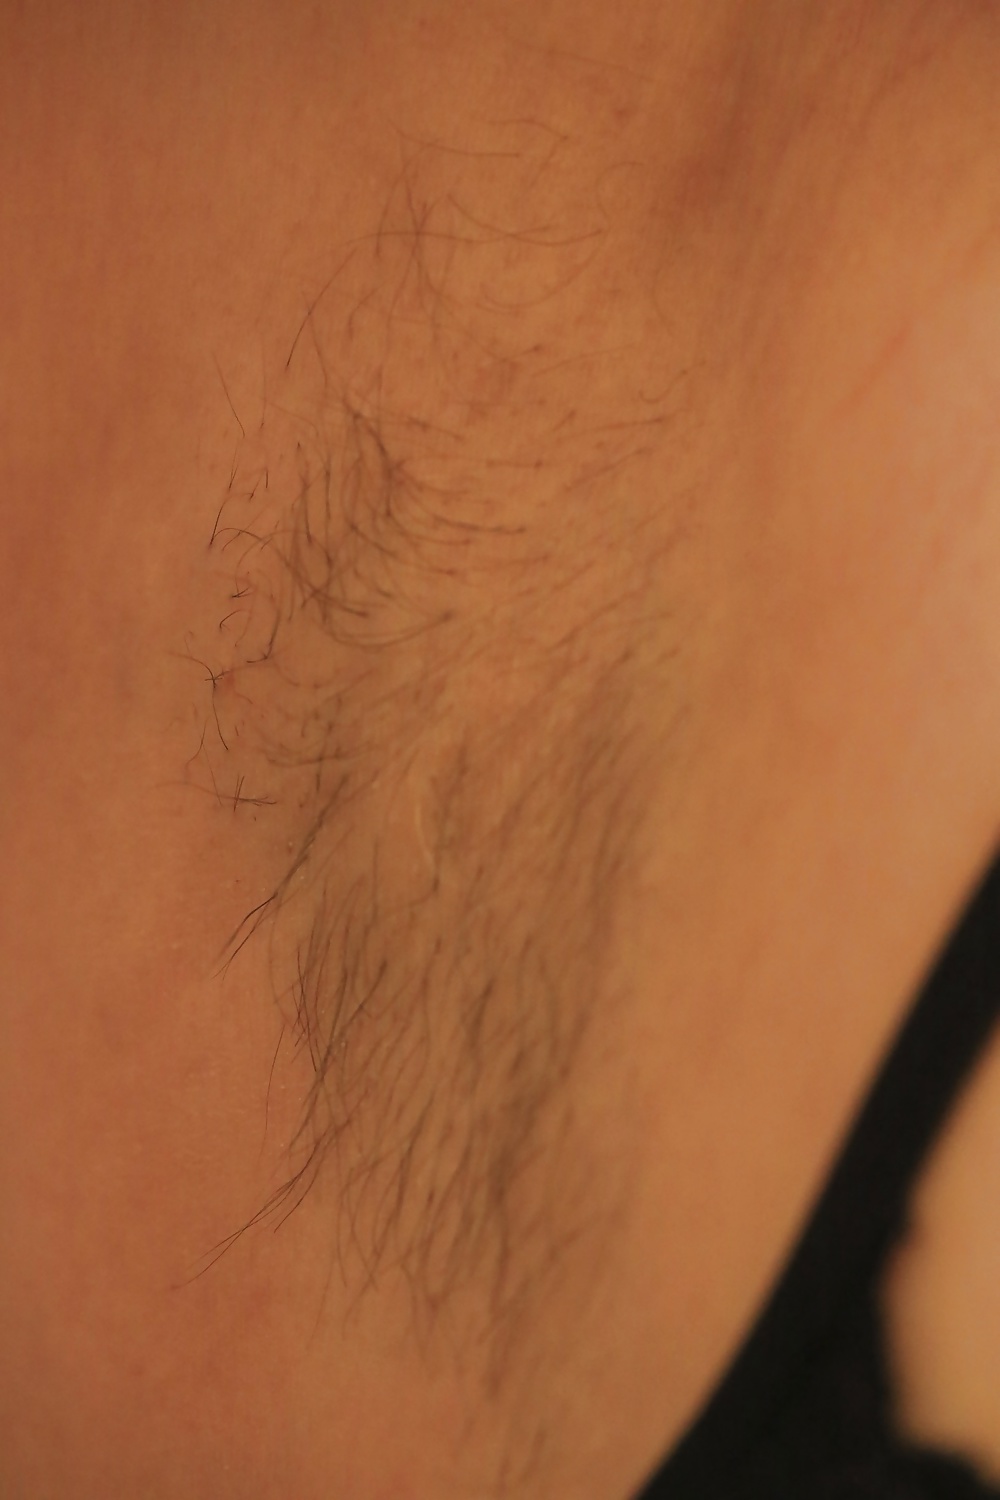 Wife's hairy armpit #29686651